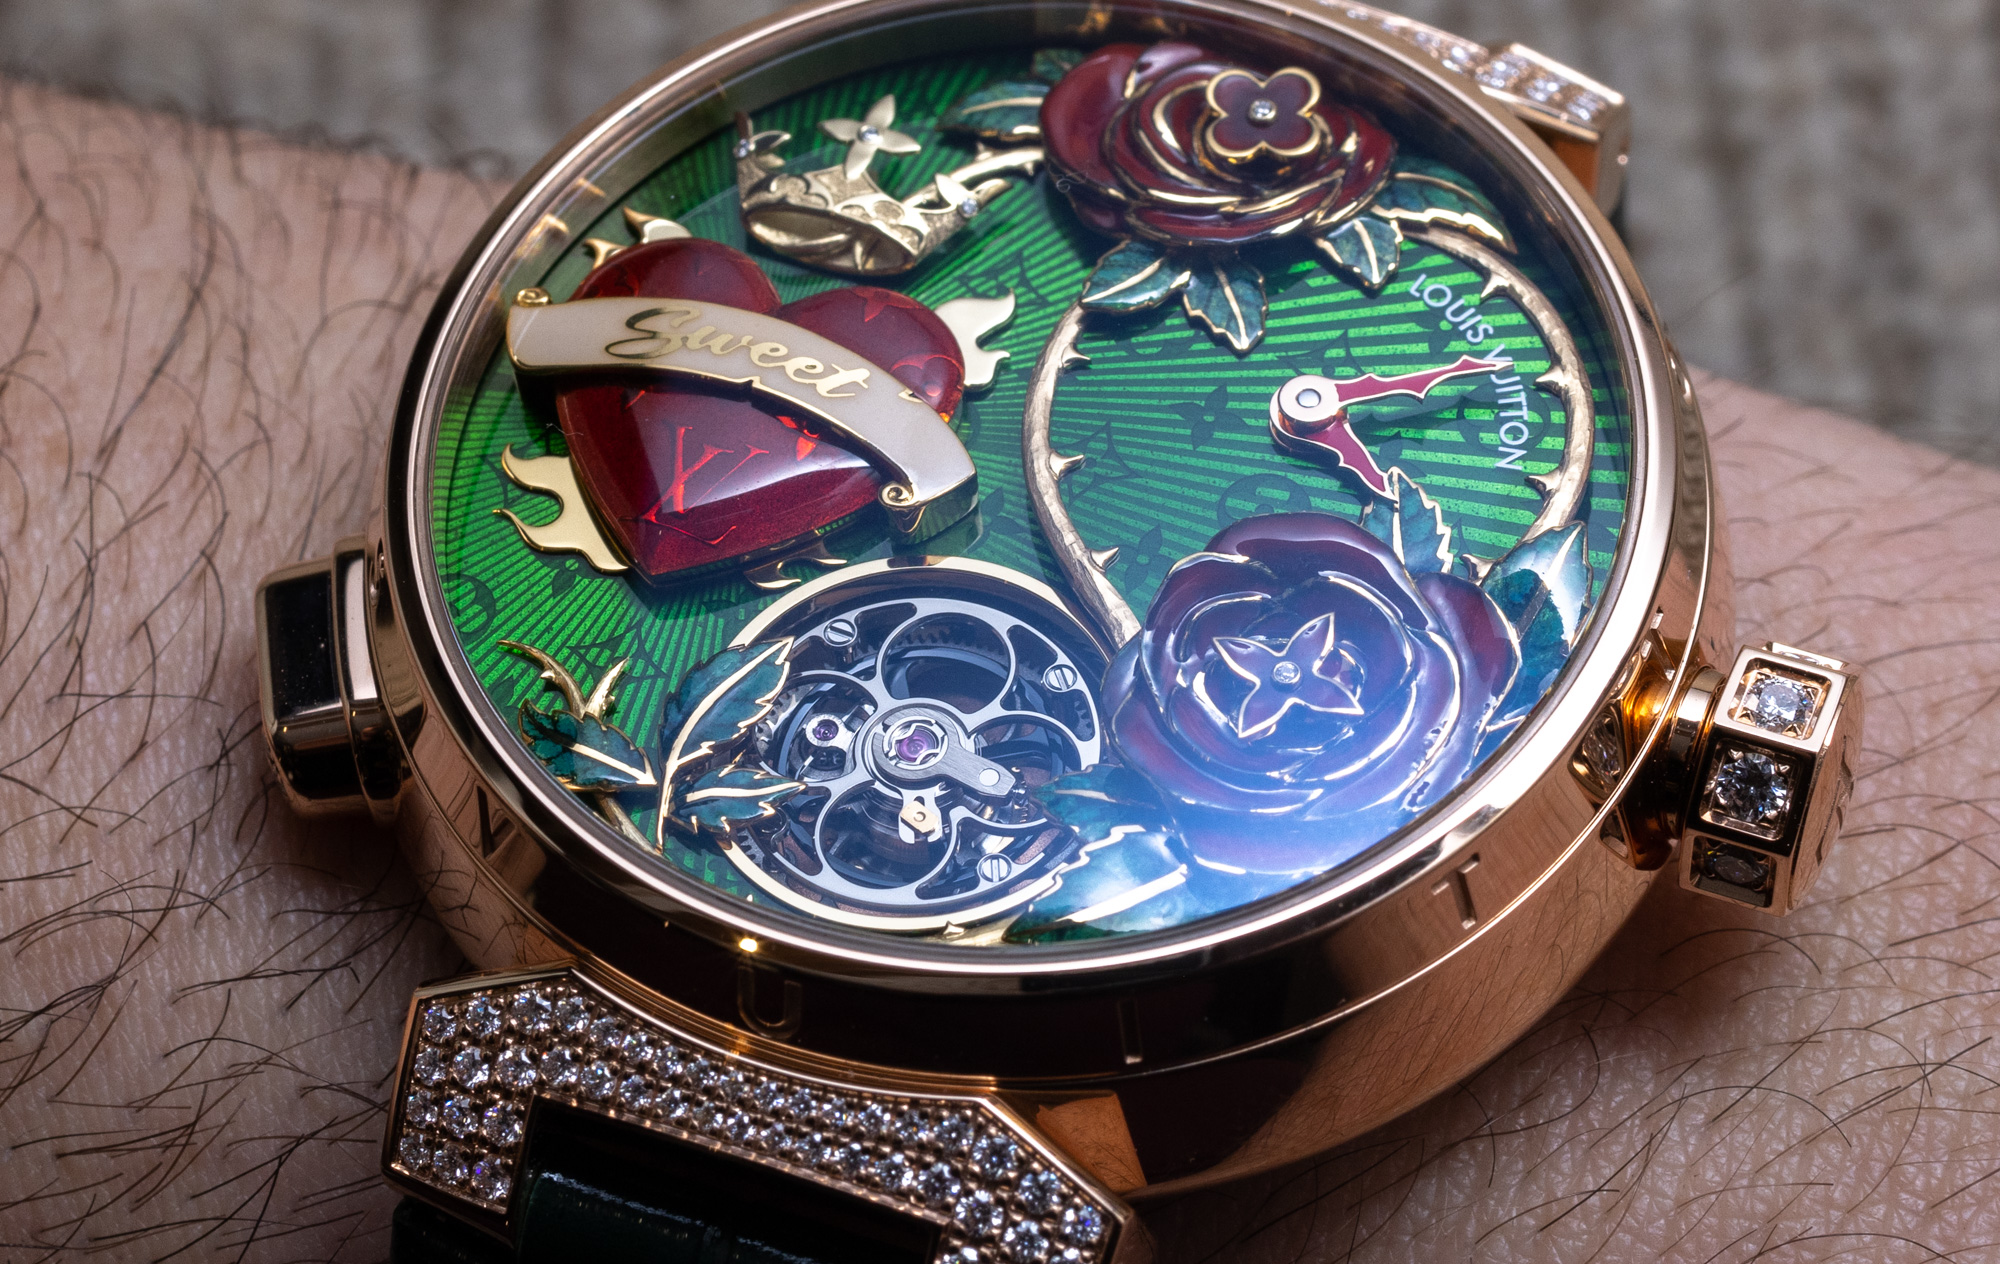 Louis Vuitton Tambour Fiery Heart Automata – The Watch Pages